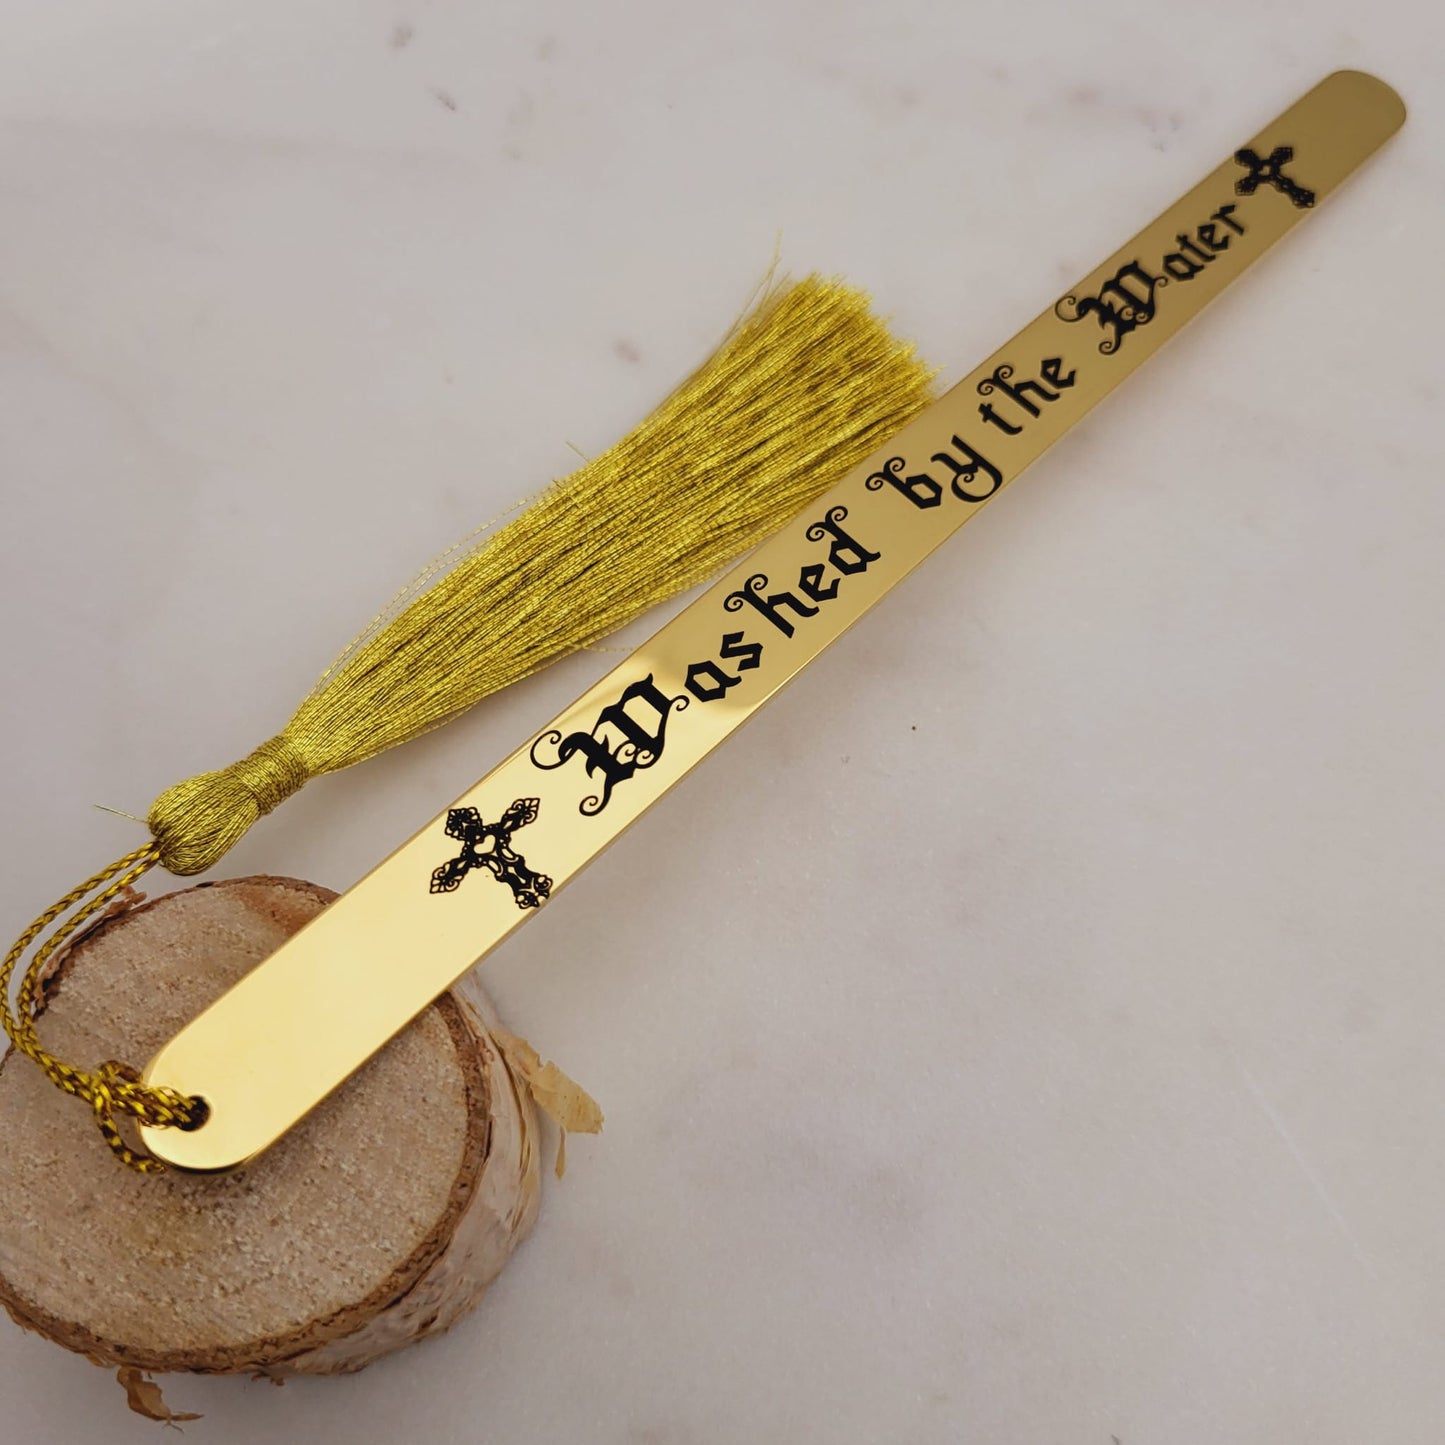 Washed By The Water Bookmark Gifts. Christian Gift. Baptism Gift, Unique Communion Gifts